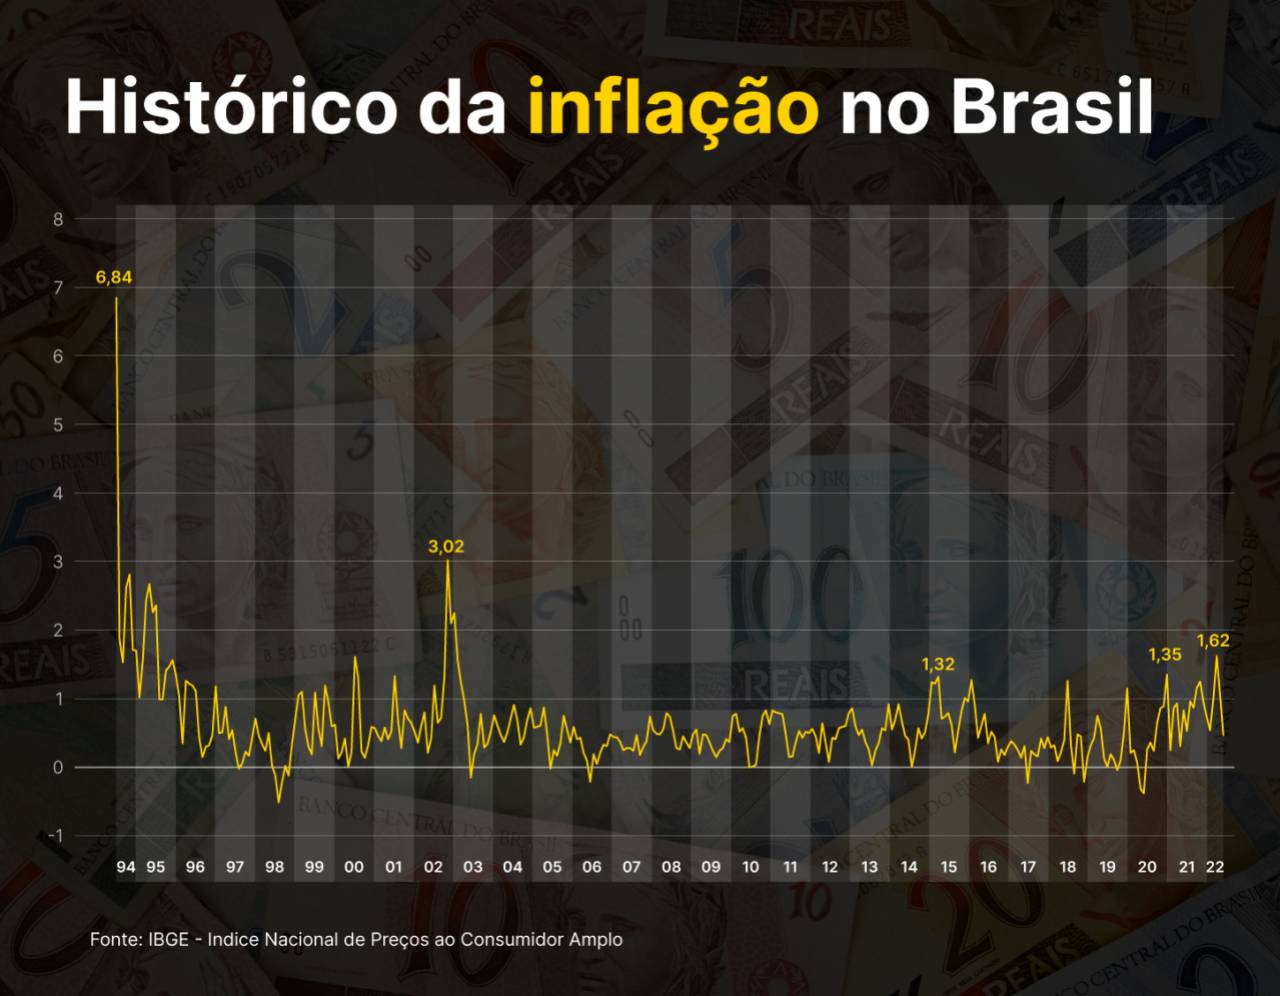 History of inflation in Brazil